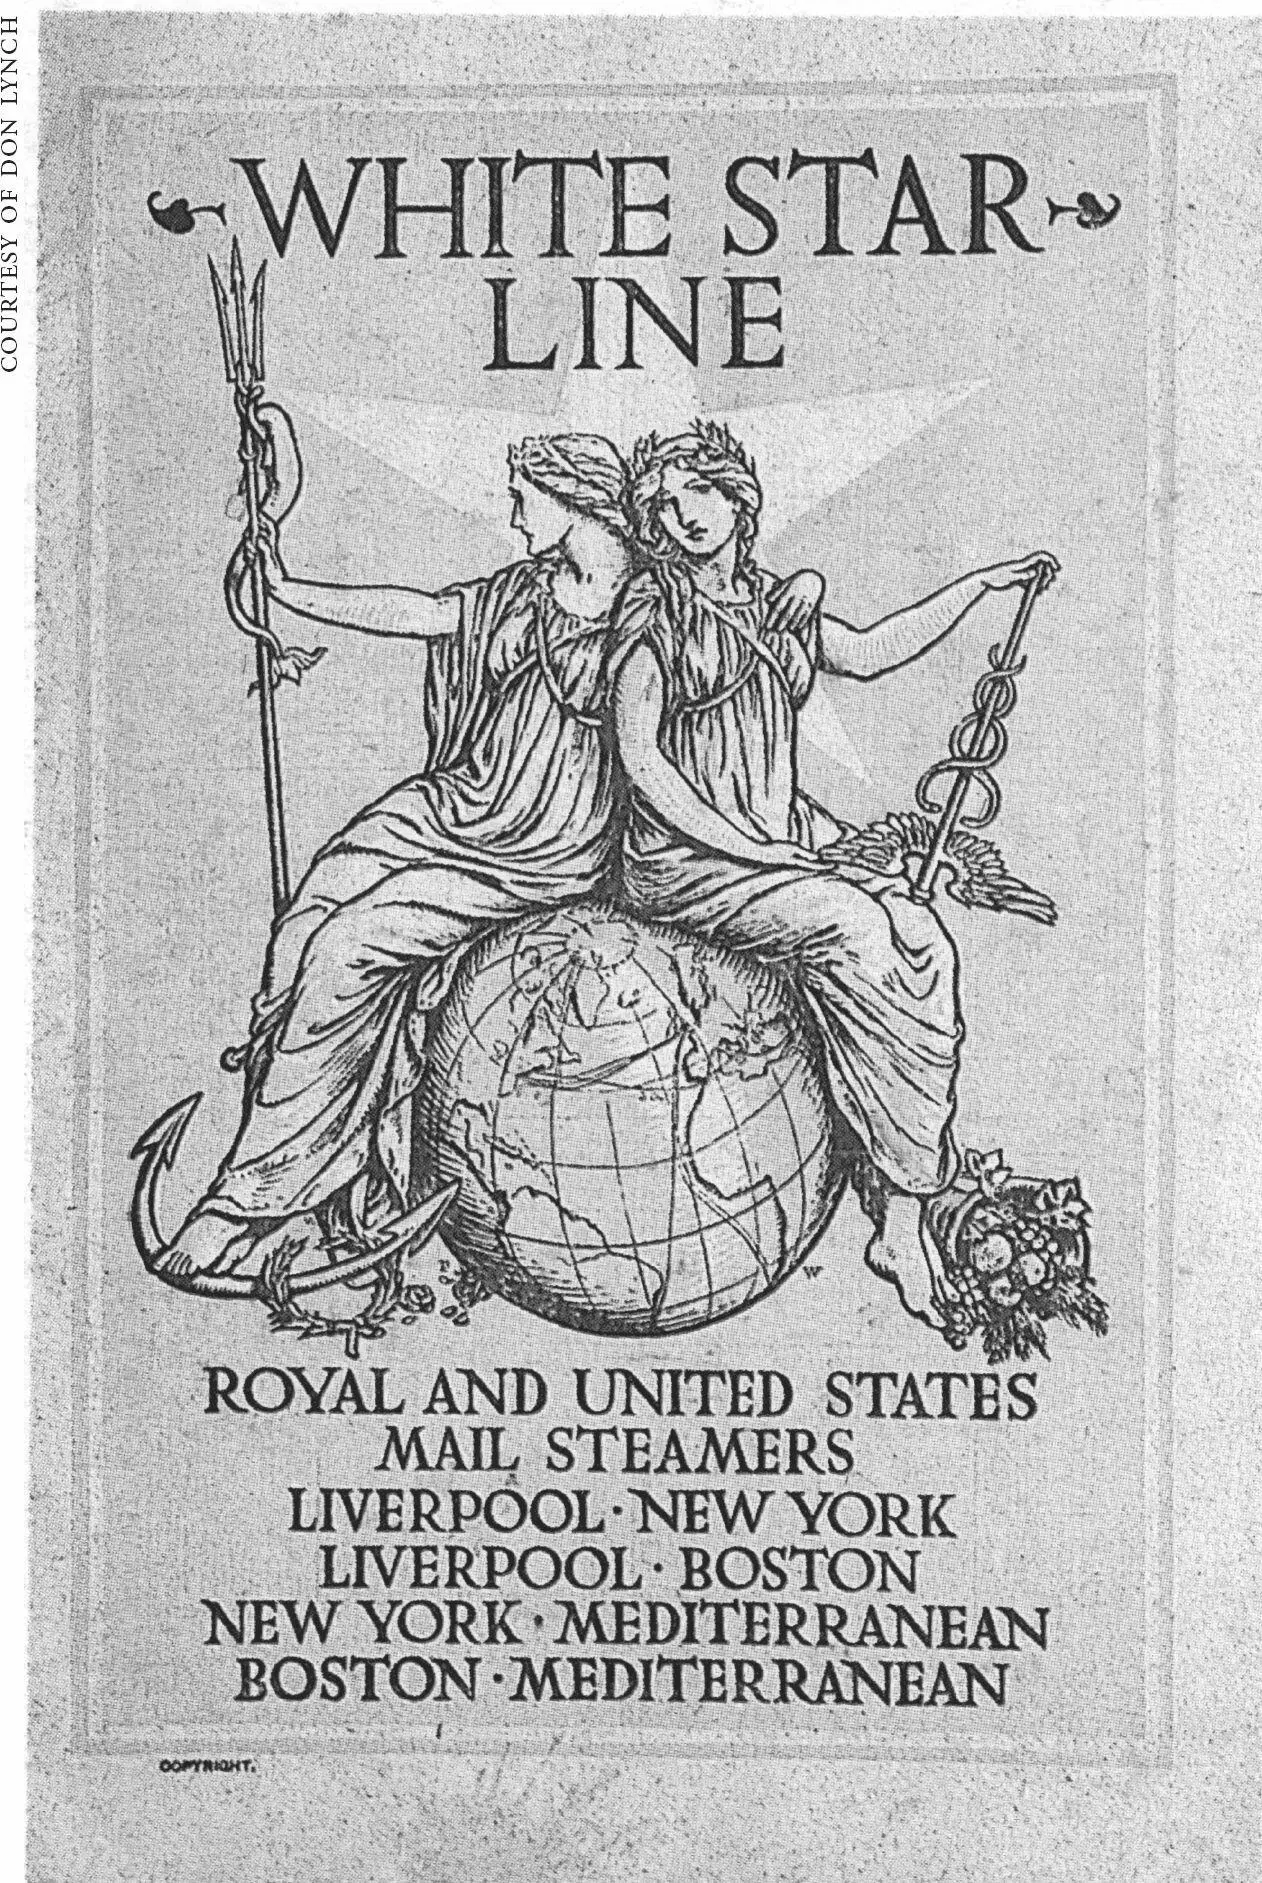 The cover of a 1906 White Star Line passenger list PART I At Sea There was - фото 2